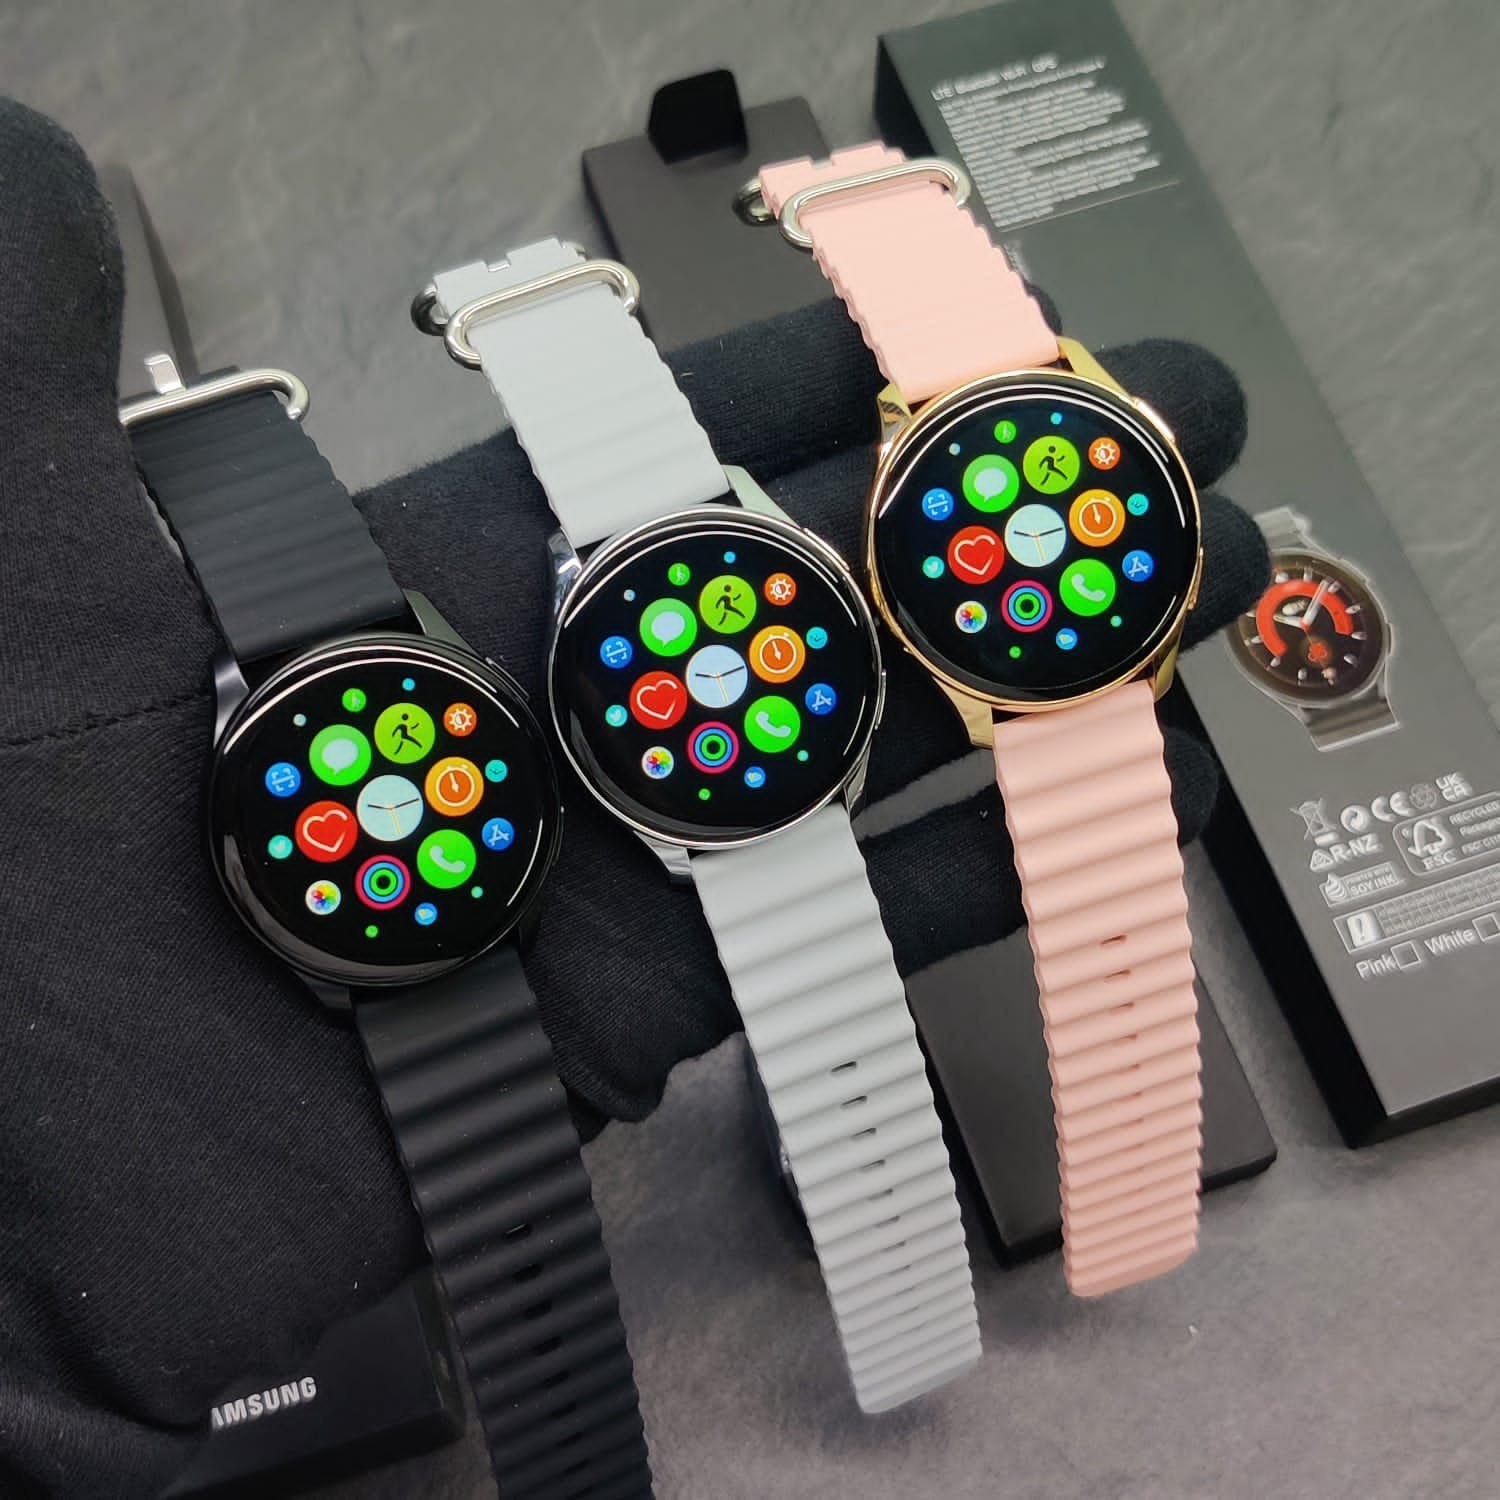 Apple Watch Series 2 (42mm) - Price in India, Specifications & Features |  Smartwatches